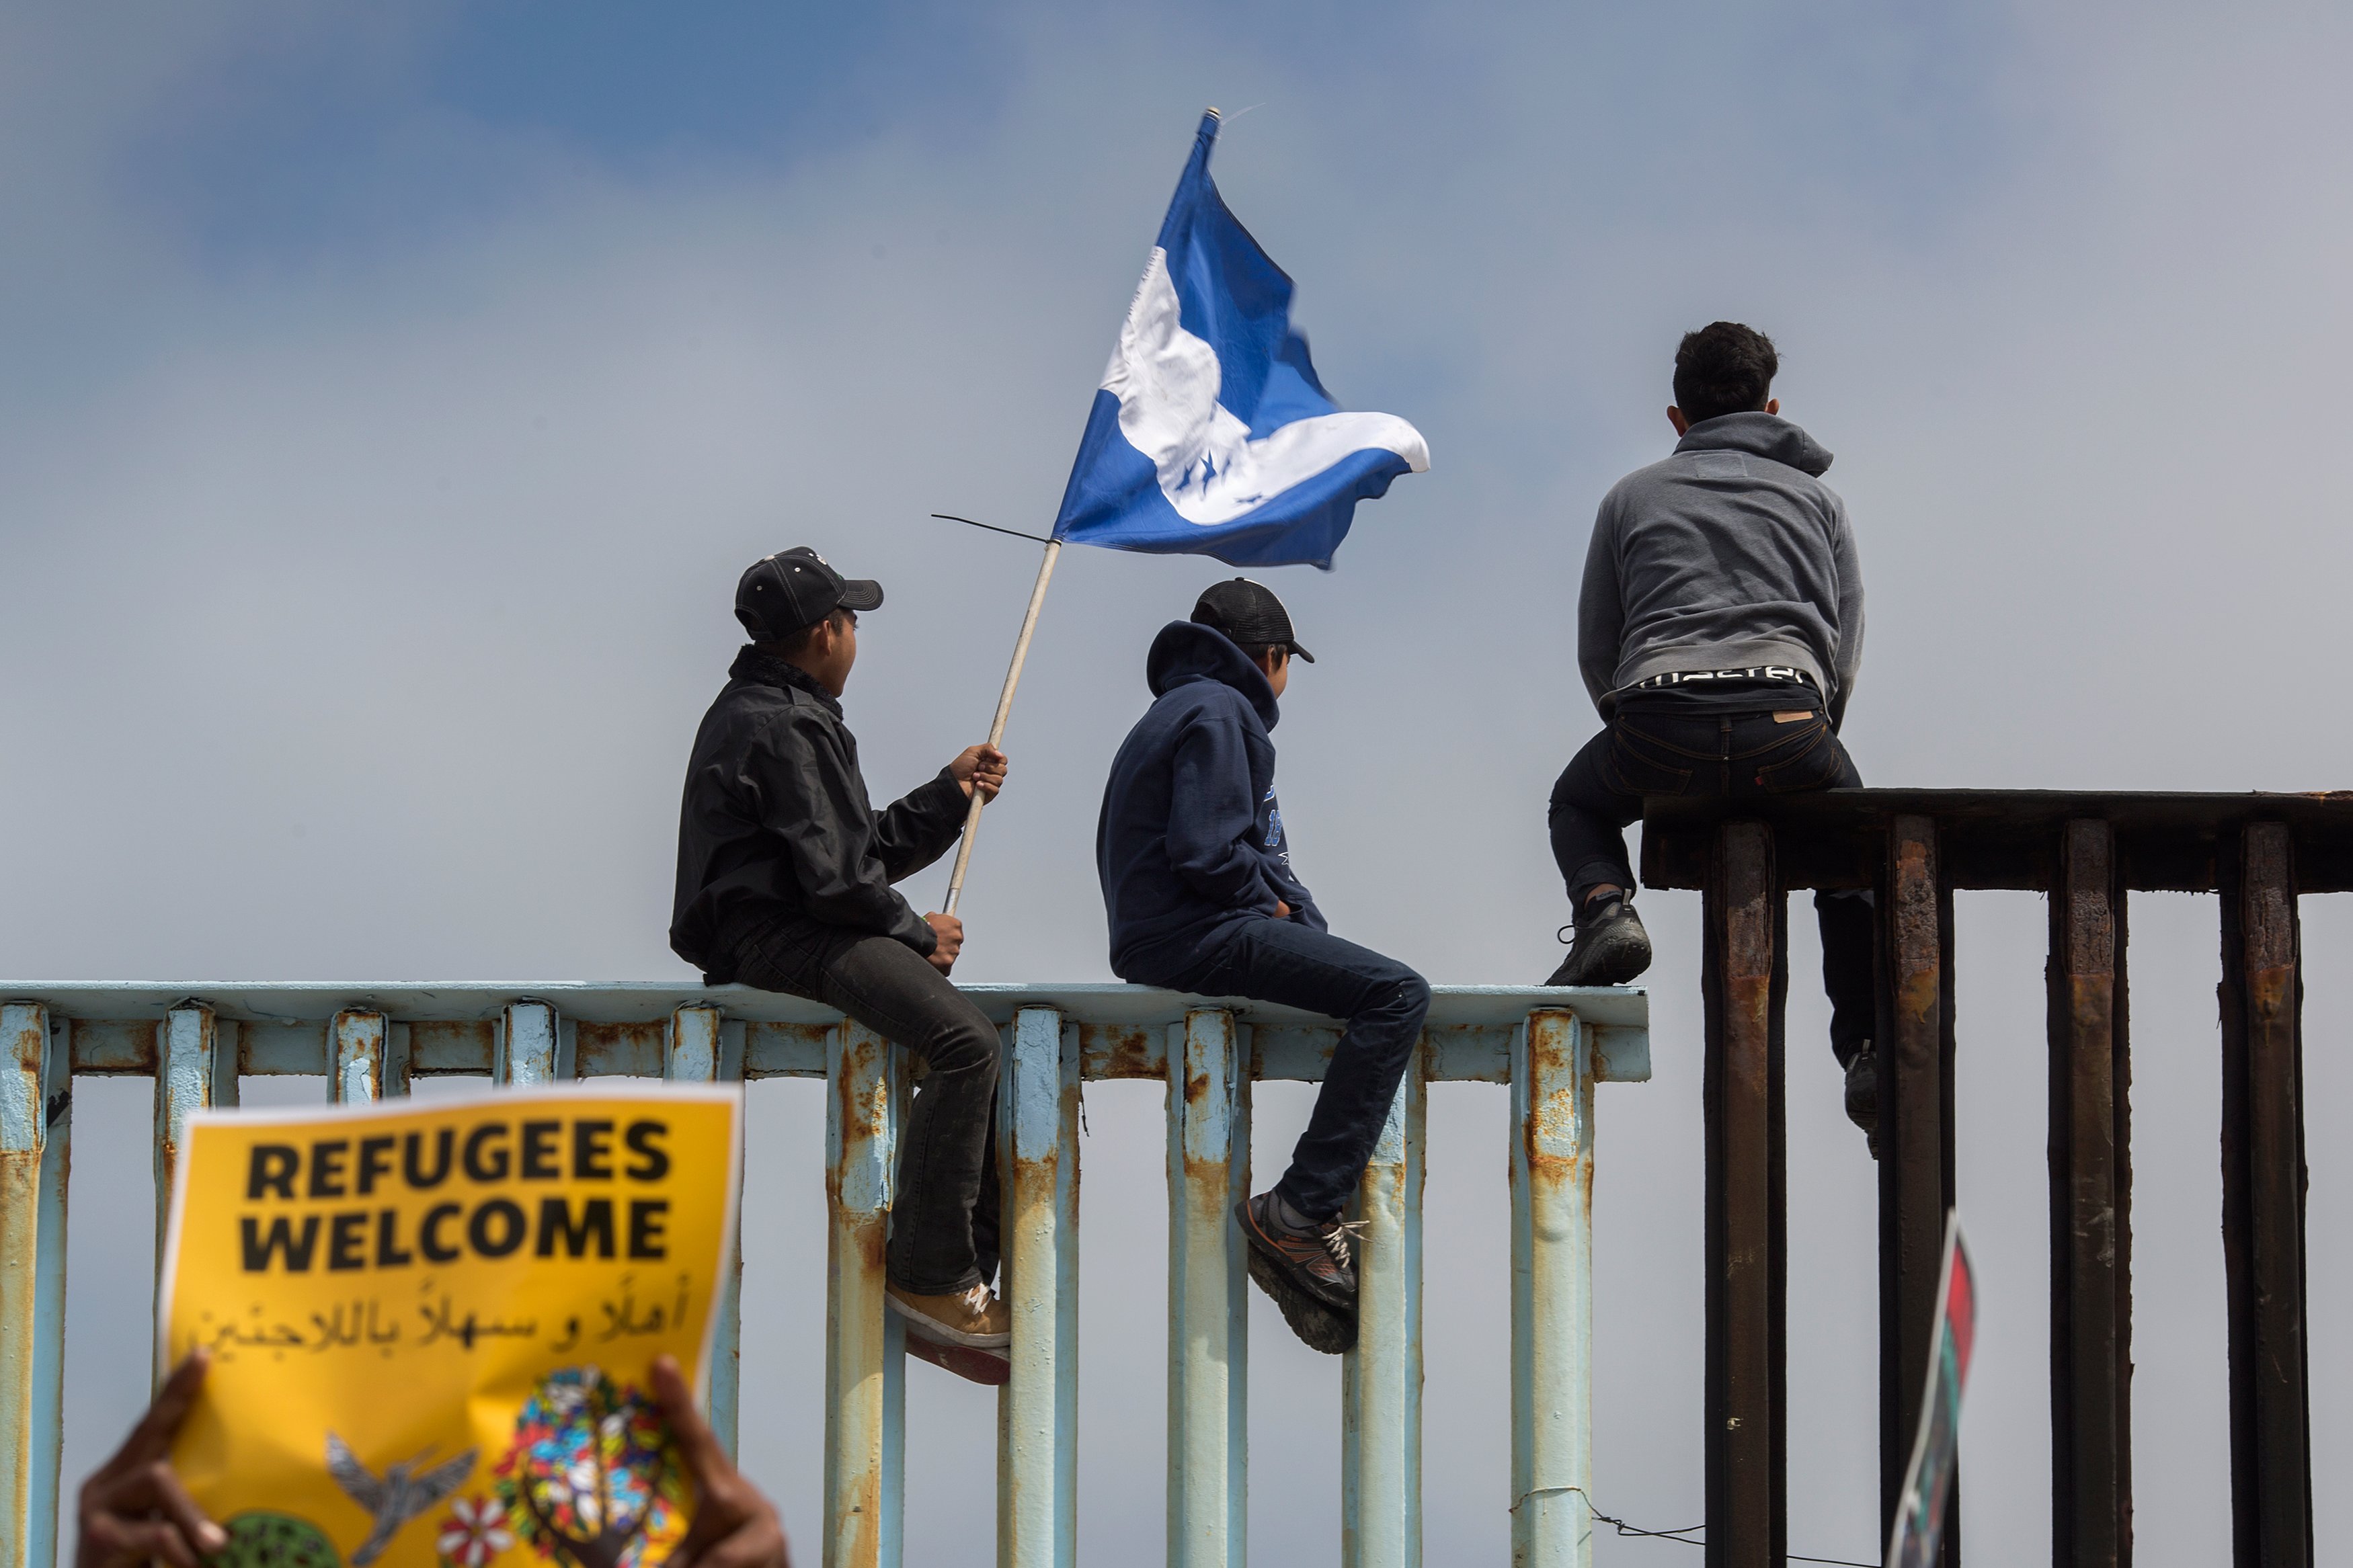 TIJUANA, MEXICO - APRIL 29: People hold a Honduran flag and look into the United States from atop a section of border fence as members of a caravan of Central American asylum seekers arrive to a rally on April 29, 2018 in Tijuana, Baja California Norte, Mexico. More than 300 immigrants, the remnants of a caravan of Central Americans that journeyed across Mexico to ask for asylum in the United States, have reached the border to apply for legal entry. (Photo by David McNew/Getty Images)